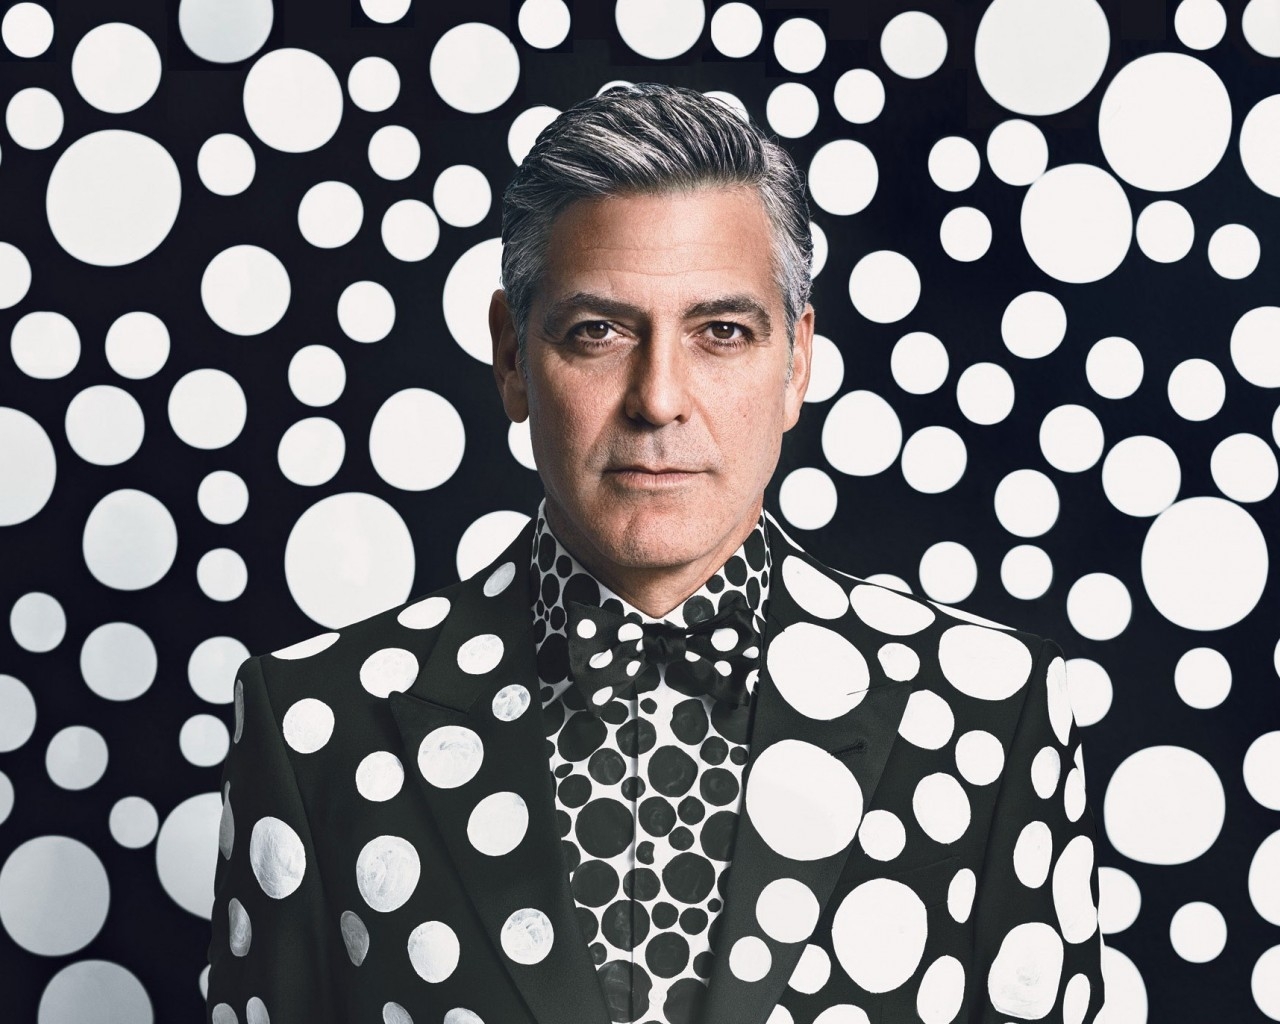 George Clooney Portrait for 1280 x 1024 resolution